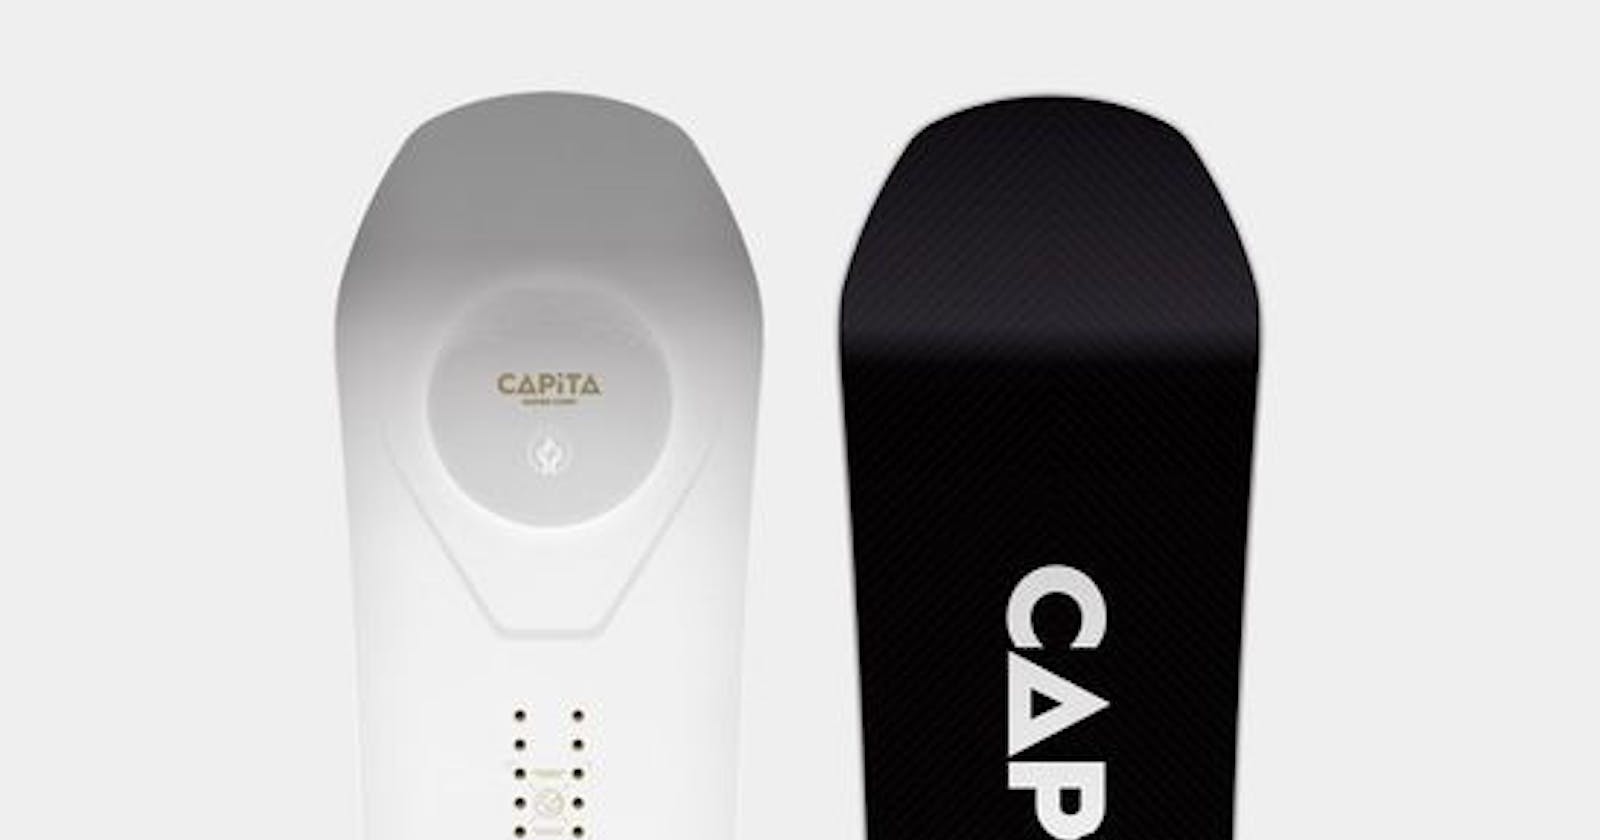 Top 5 Best Capita Snowboards For This Season